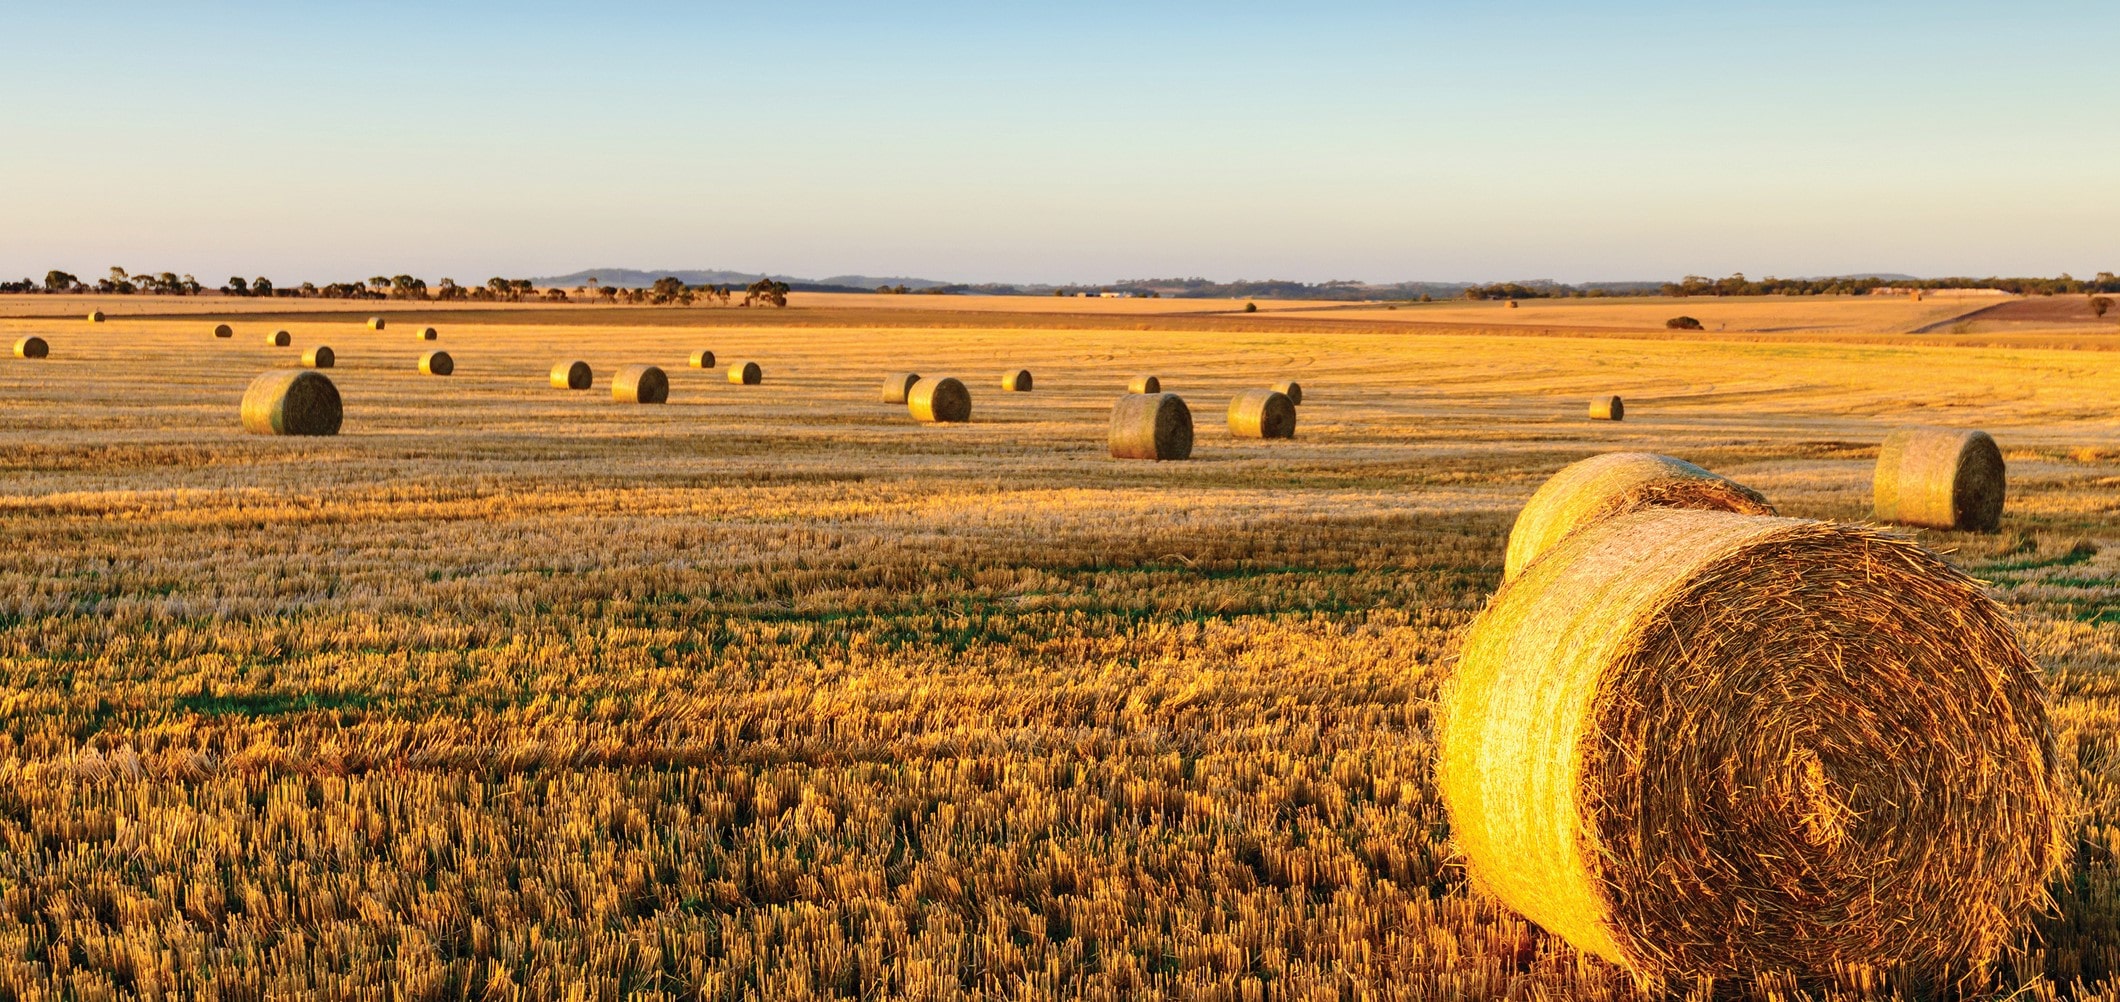 A panoramic view of a harvested field with round hay bales during golden hour with a clear sky.